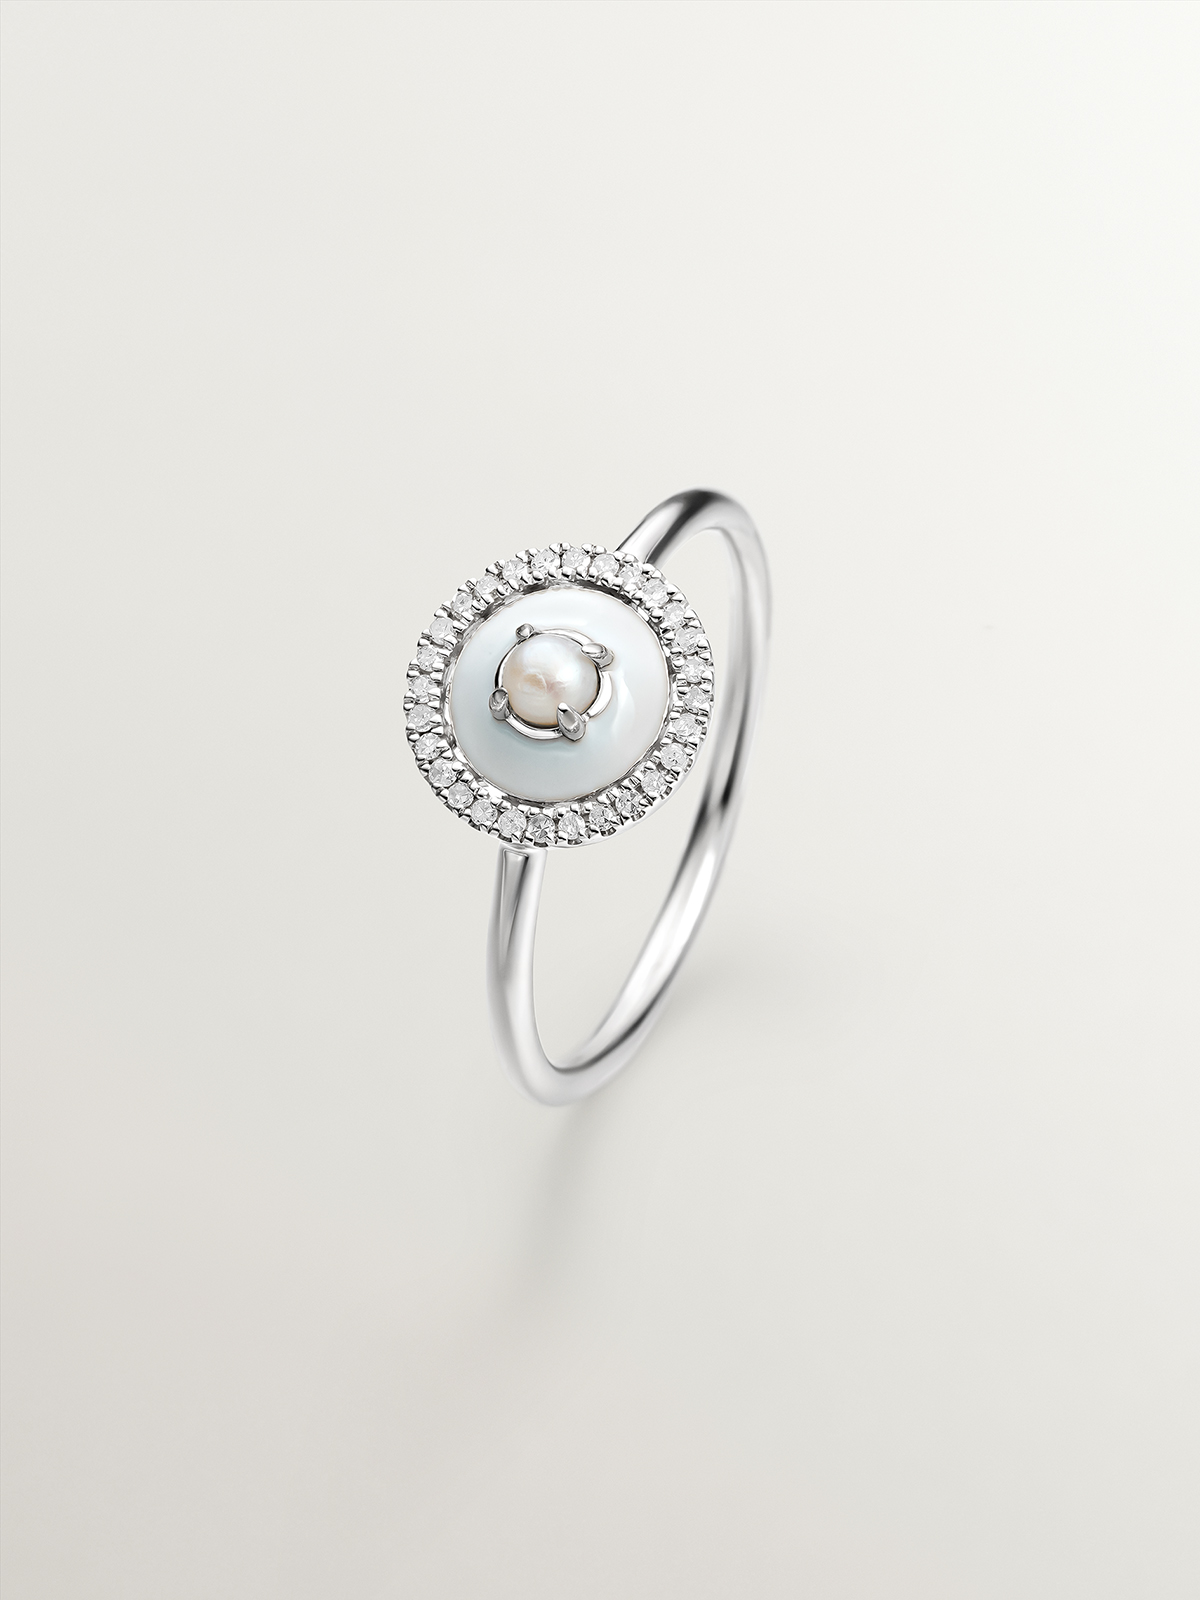 925 silver ring and 18K white gold with white pearl, white diamonds and gray enamel